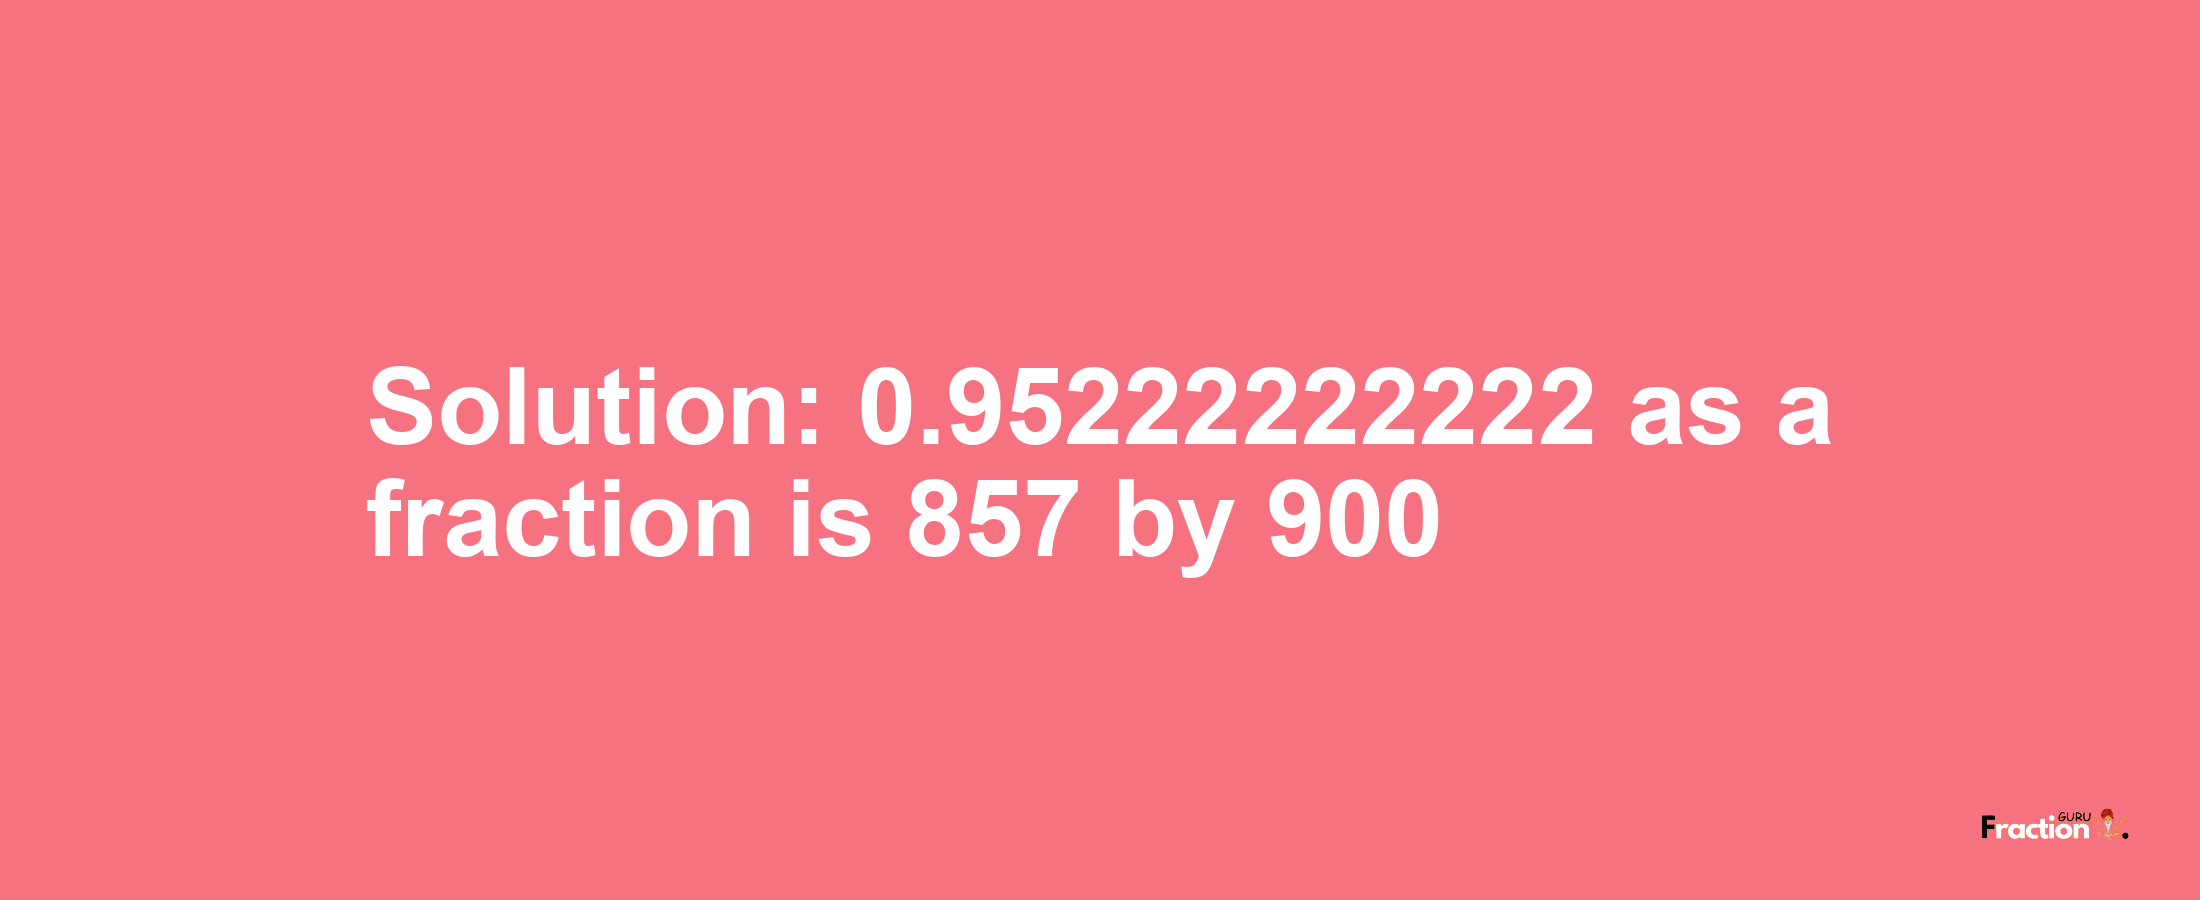 Solution:0.95222222222 as a fraction is 857/900